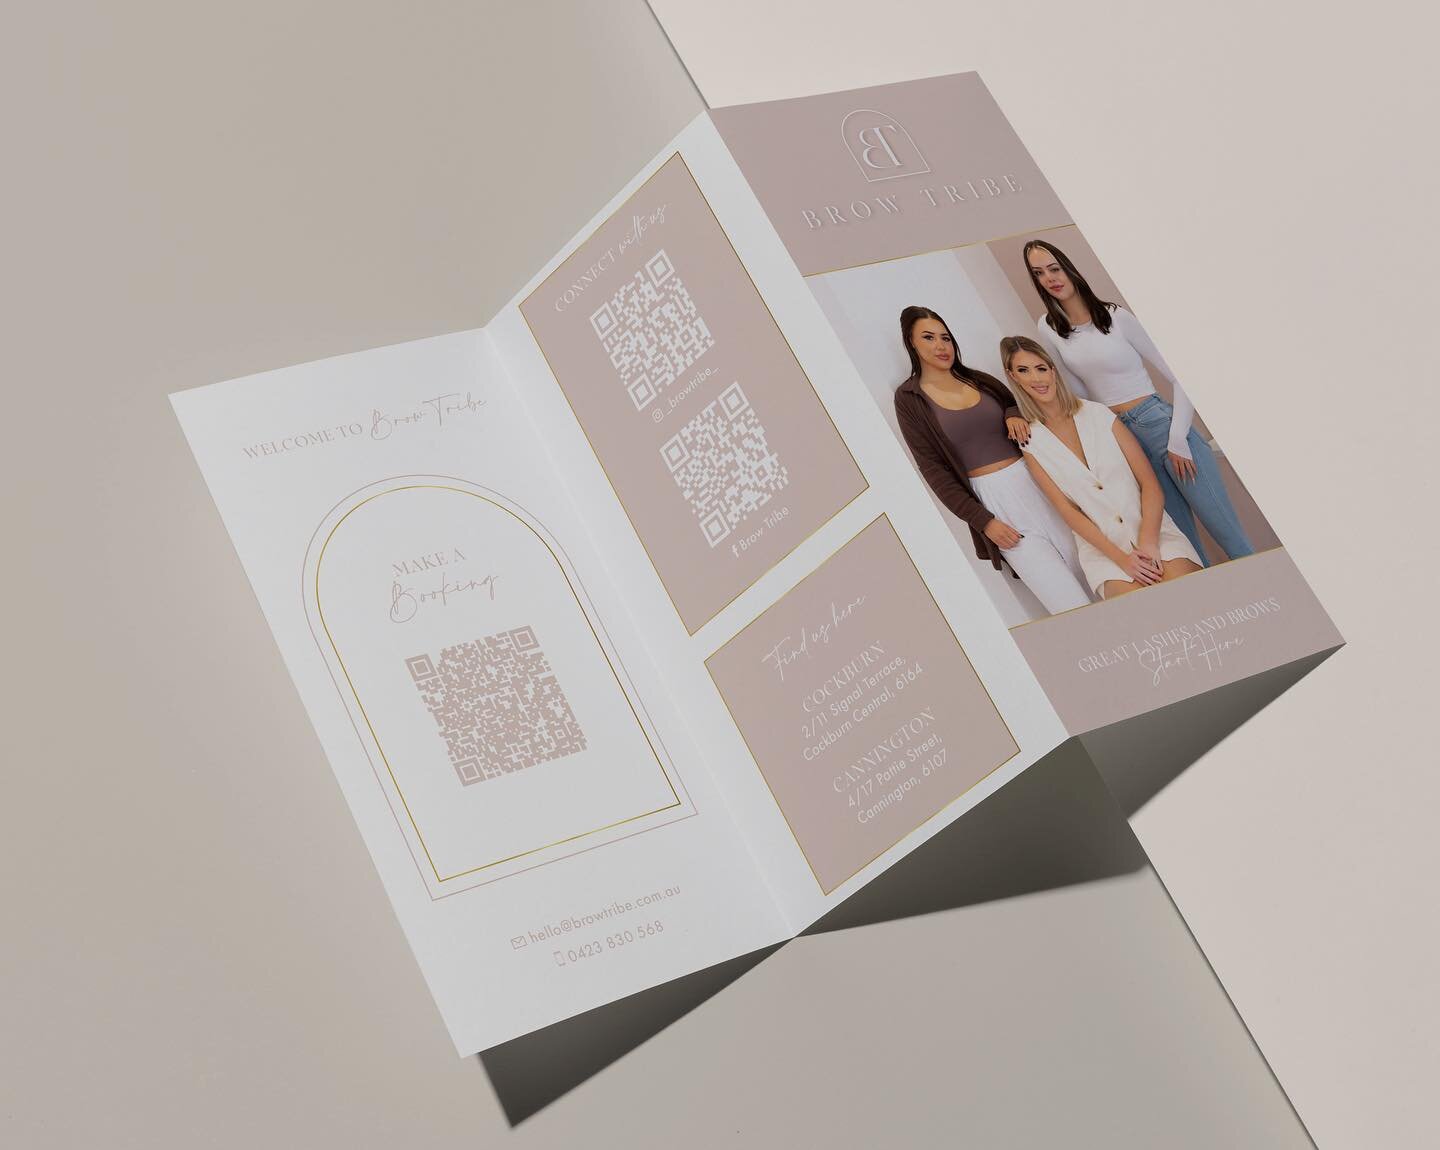 Congratulations to Celine at @_browtribe_ for the opening of her new salon! Must check it out if you haven&rsquo;t already. 😍

The best way to use brochures is to intimately describe your company, products or services in an eye catching format. Thin